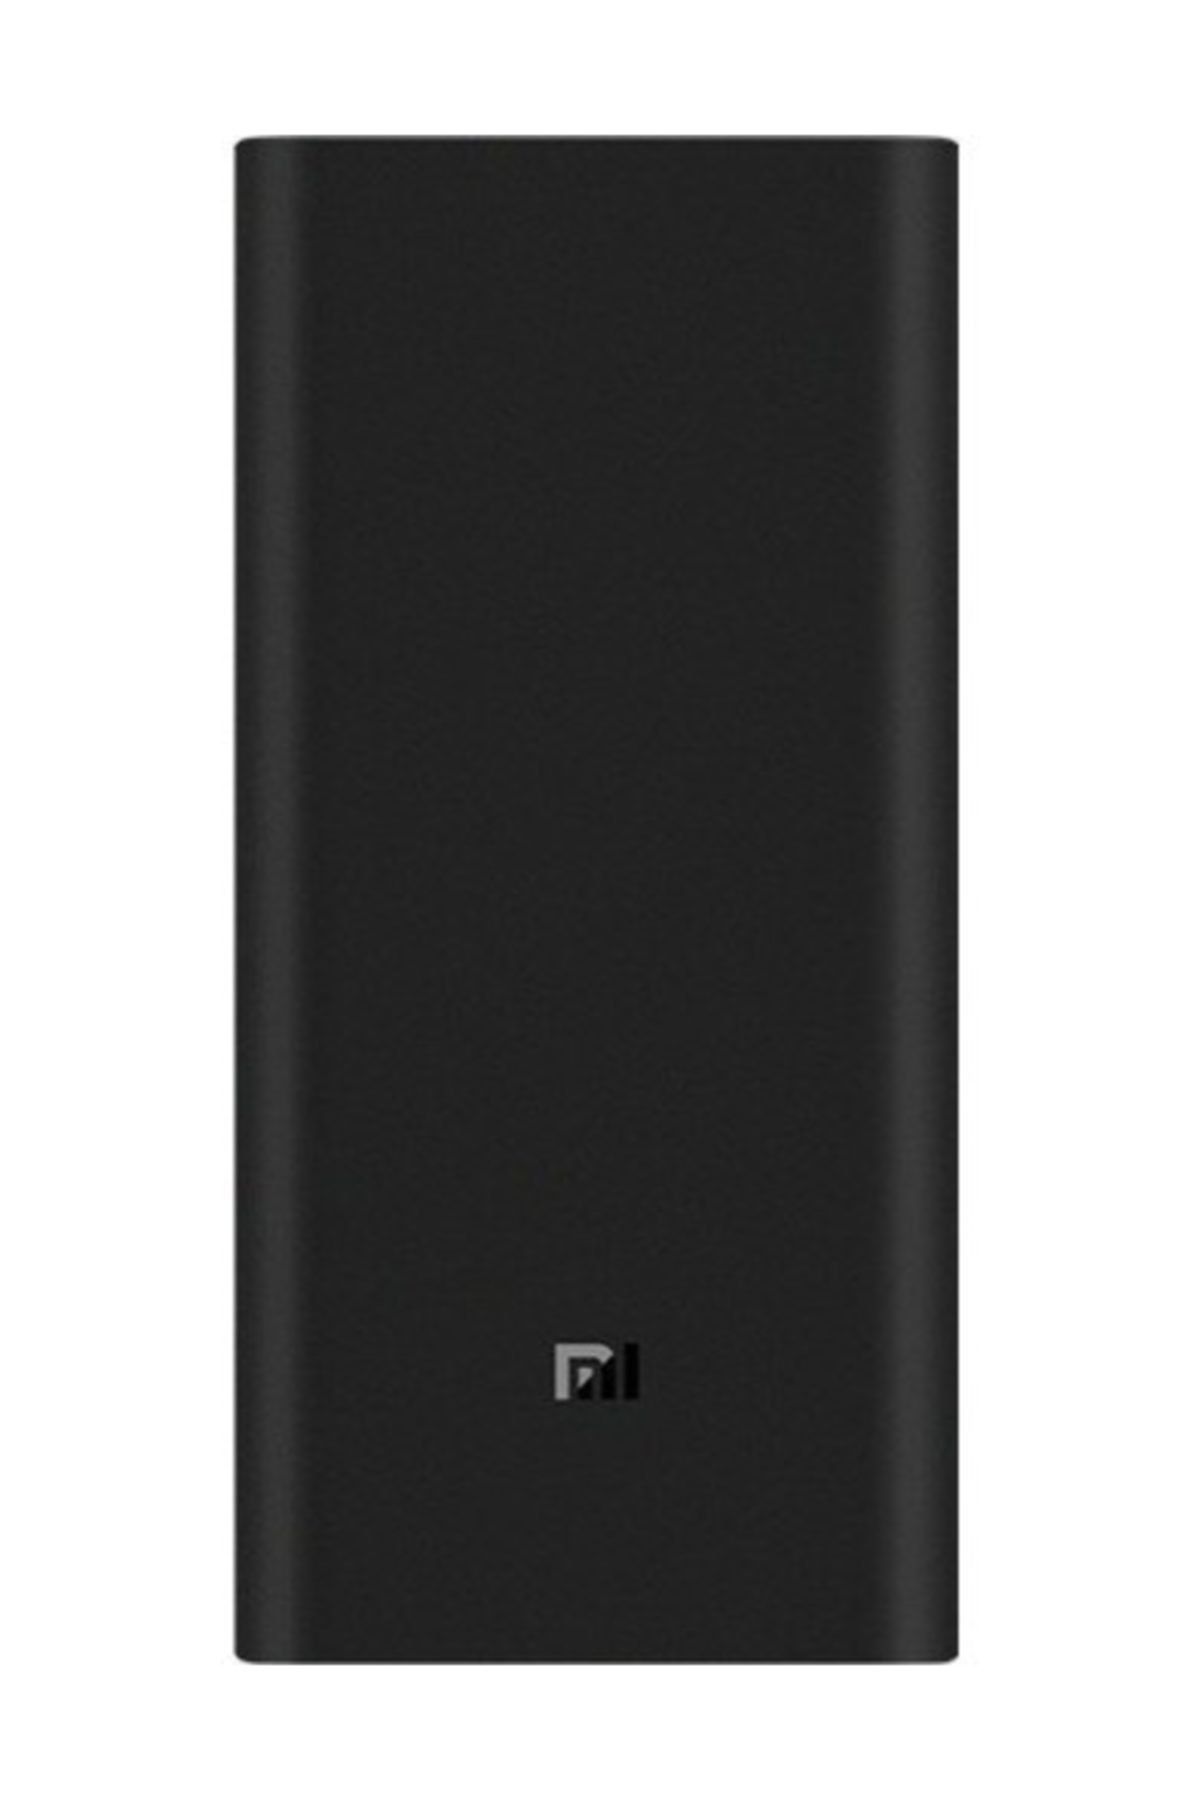 Xiaomi 3 PRO Power Bank, 20000mAh, USB-C 45W Power Delivery and